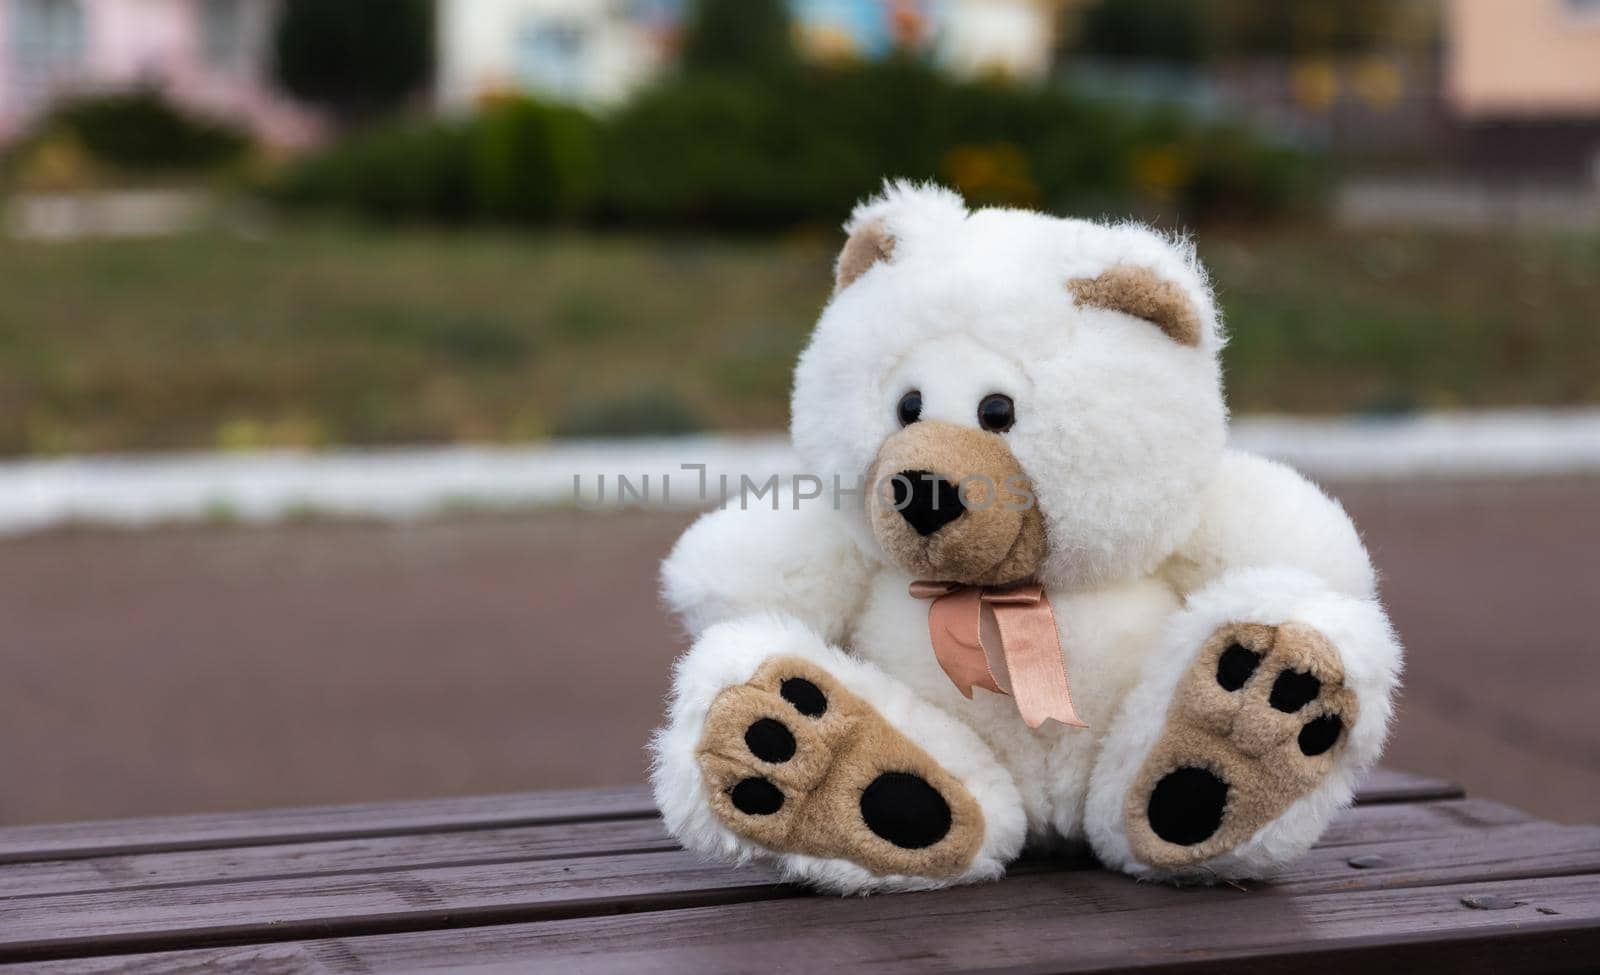 Sad lonely teddy bear. White fluffy teddy bear lonely sits on an old wooden bench in a overgrown garden.